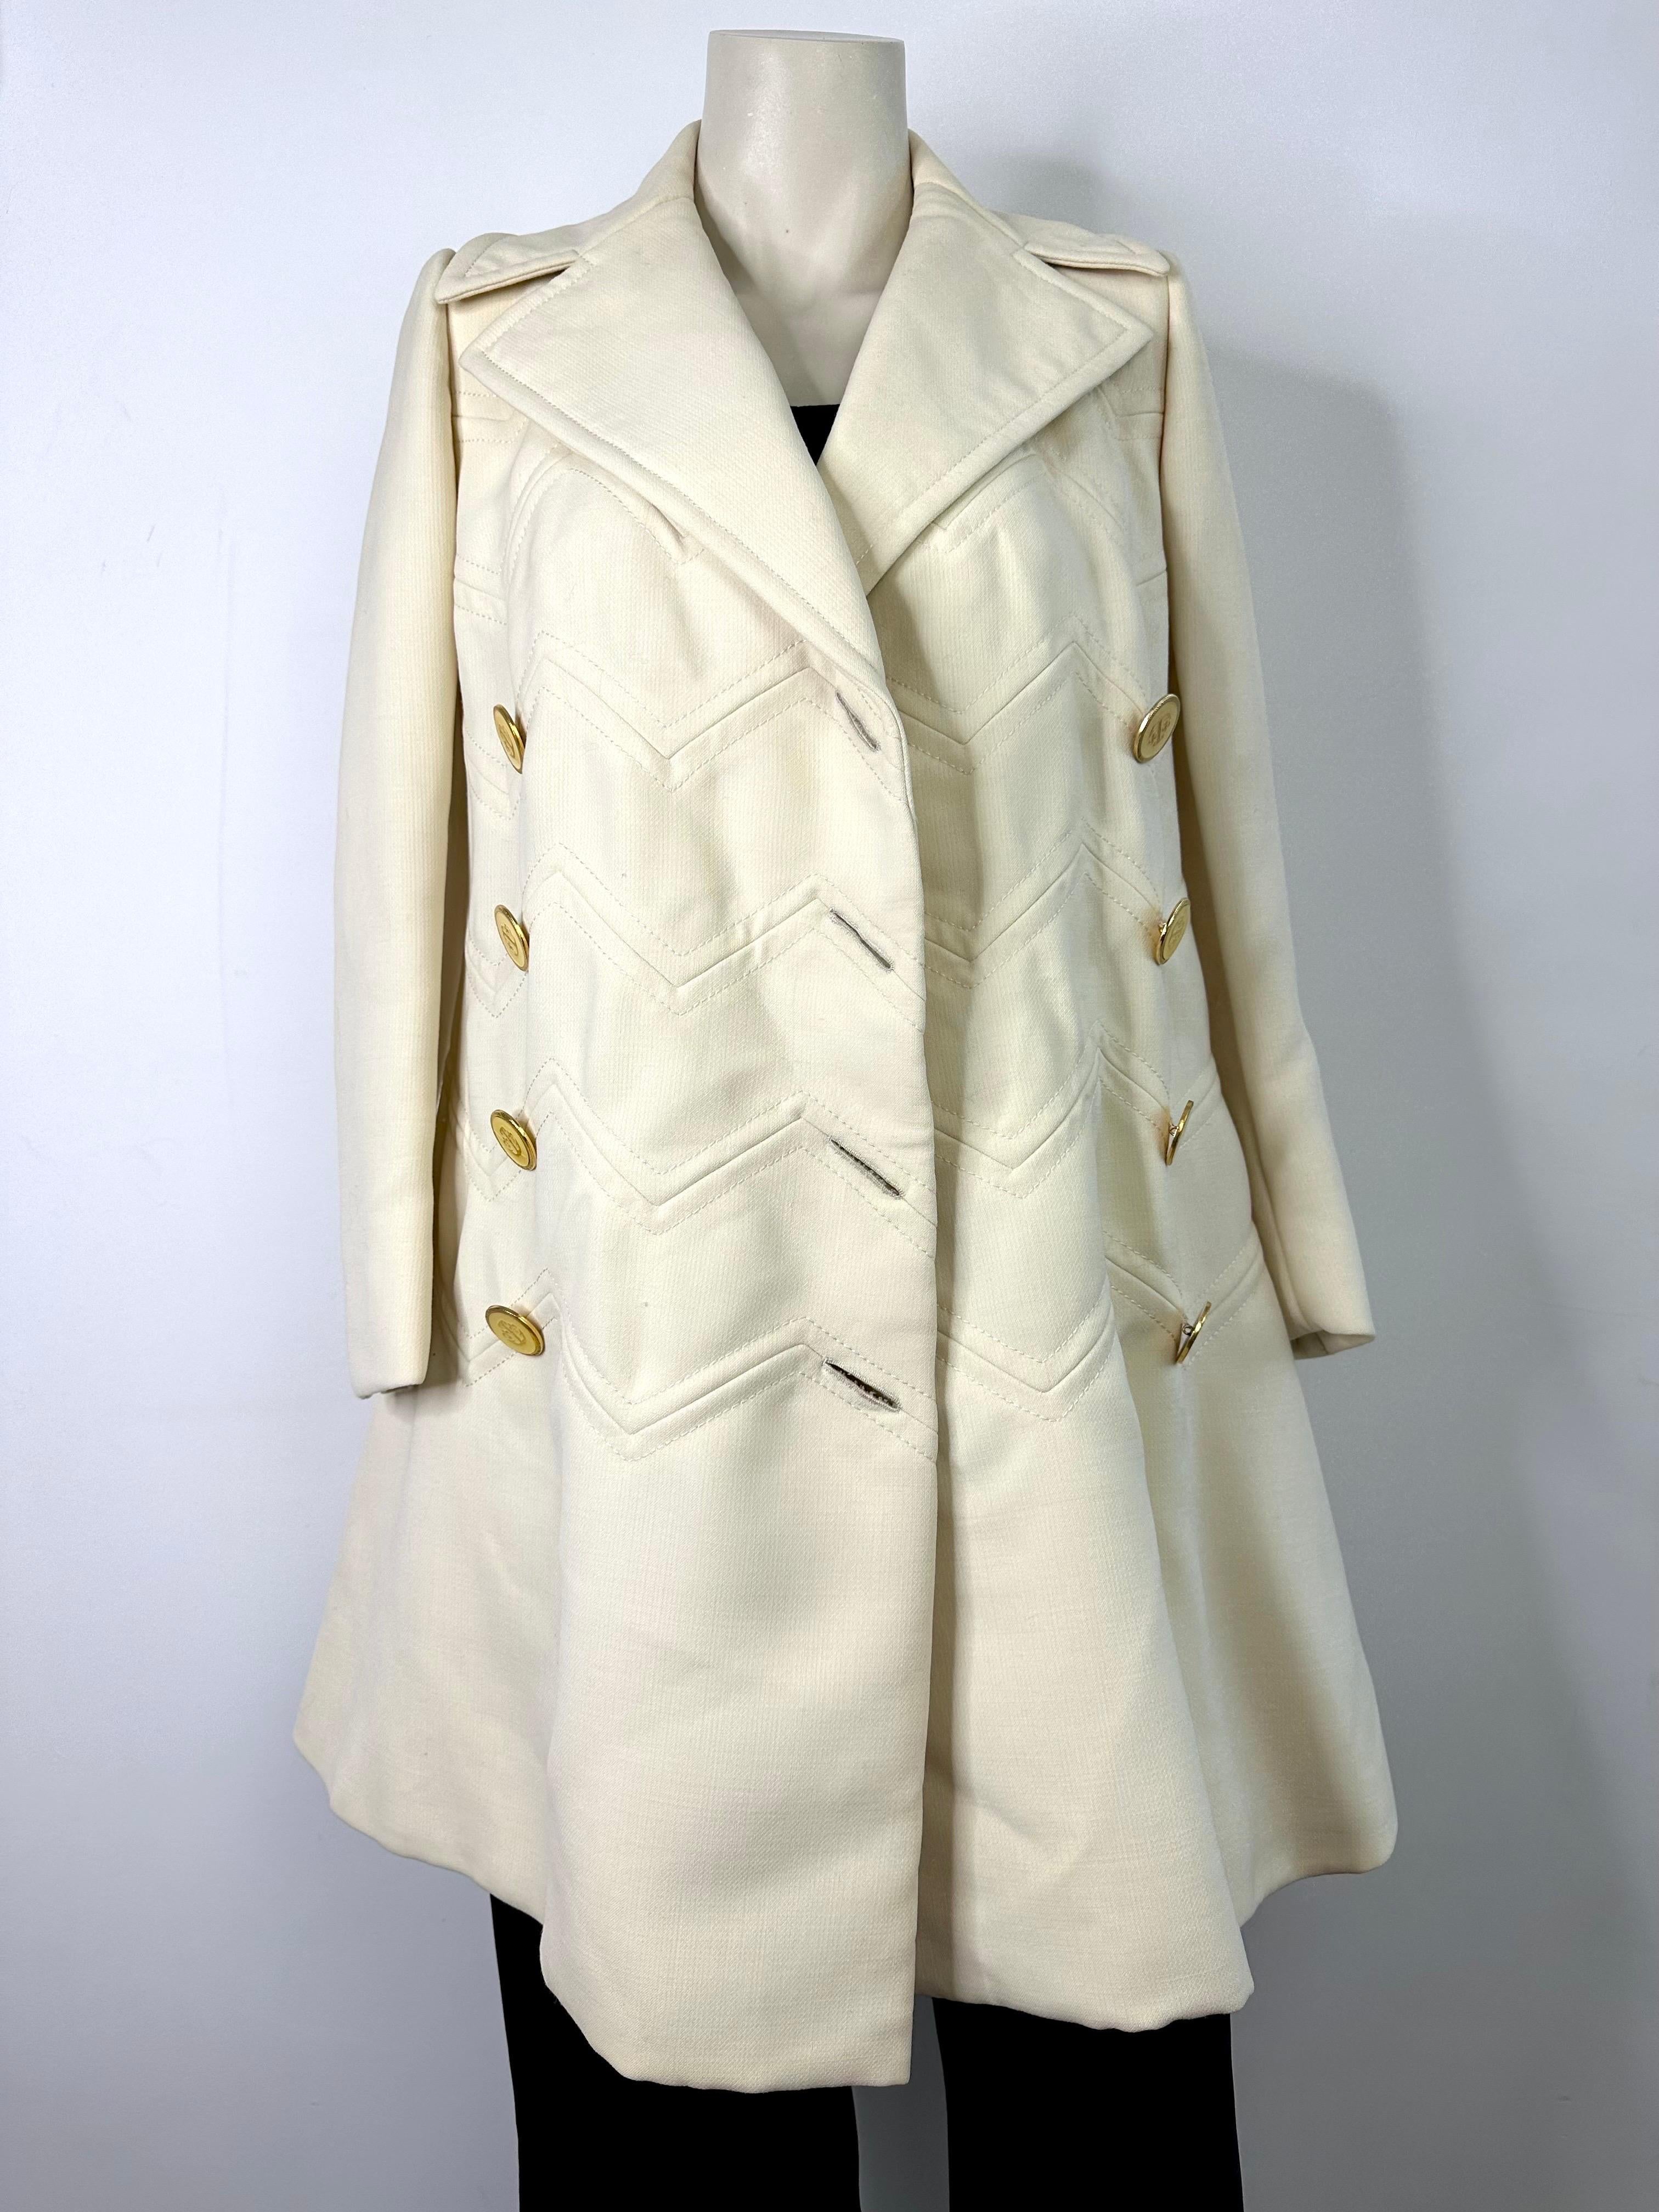 Vintage Ted Lapidus coat in ivory wool from the 1960s For Sale 6